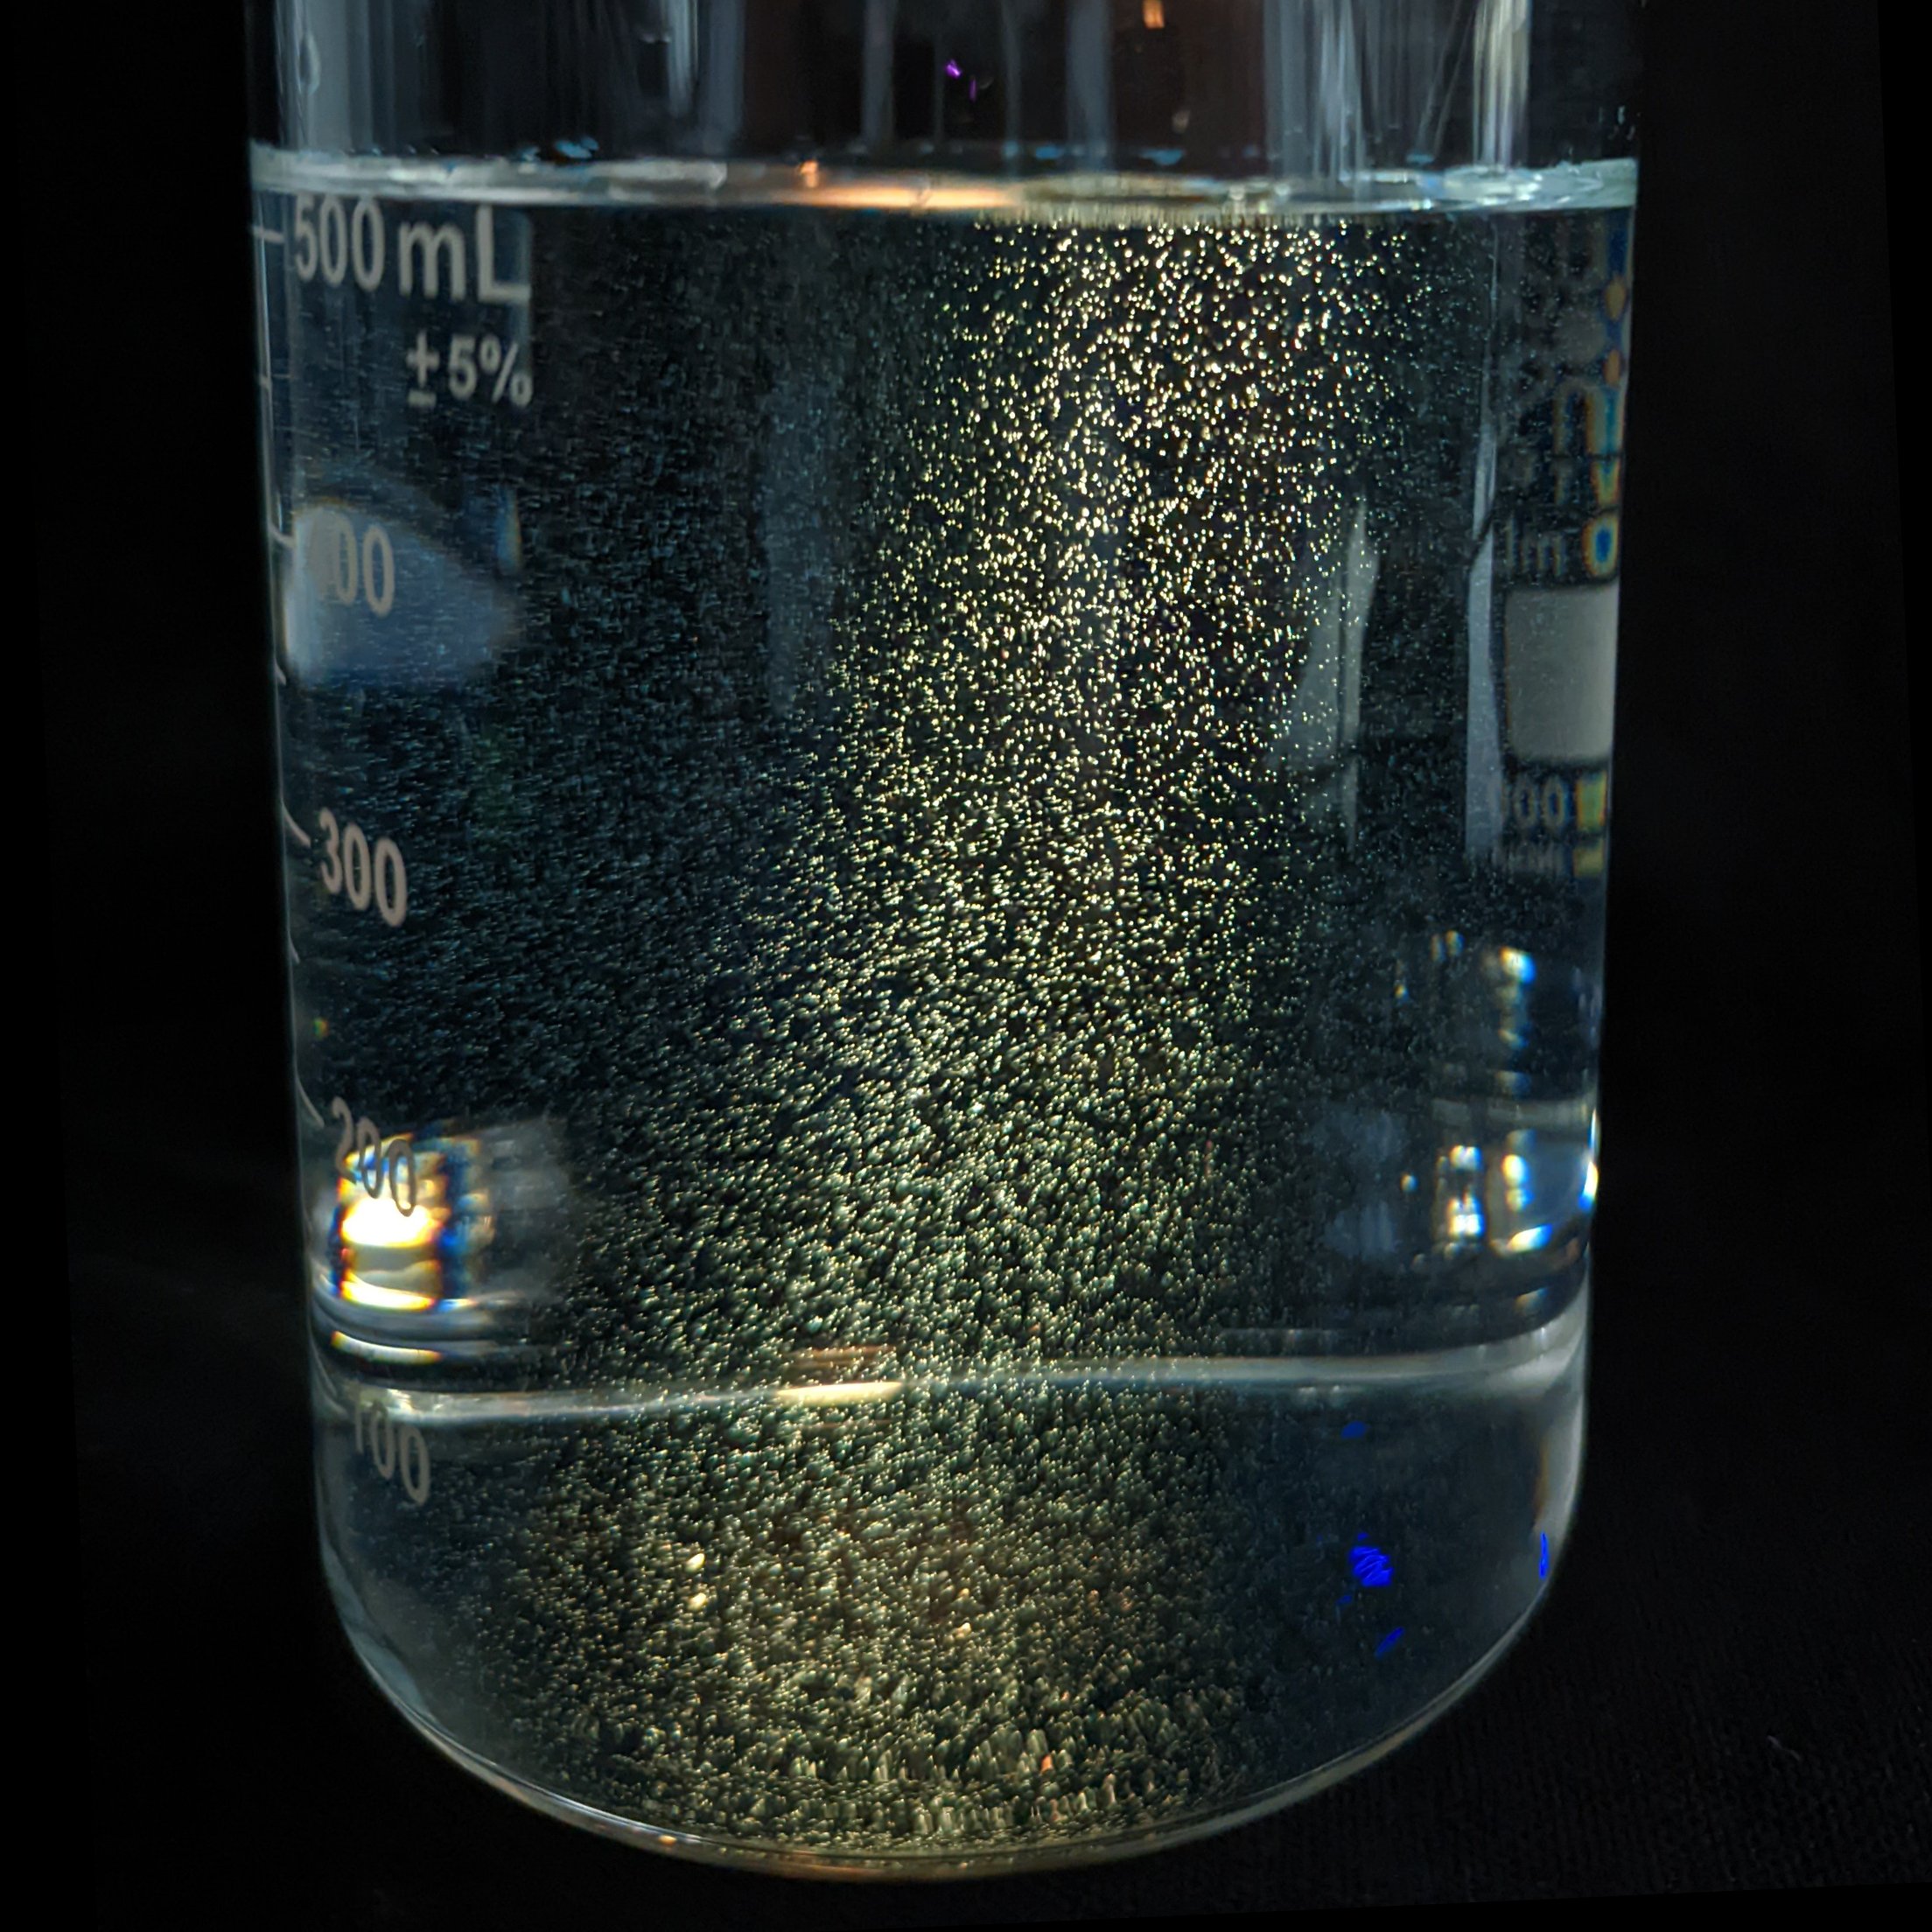 dispersion of microplastics in water